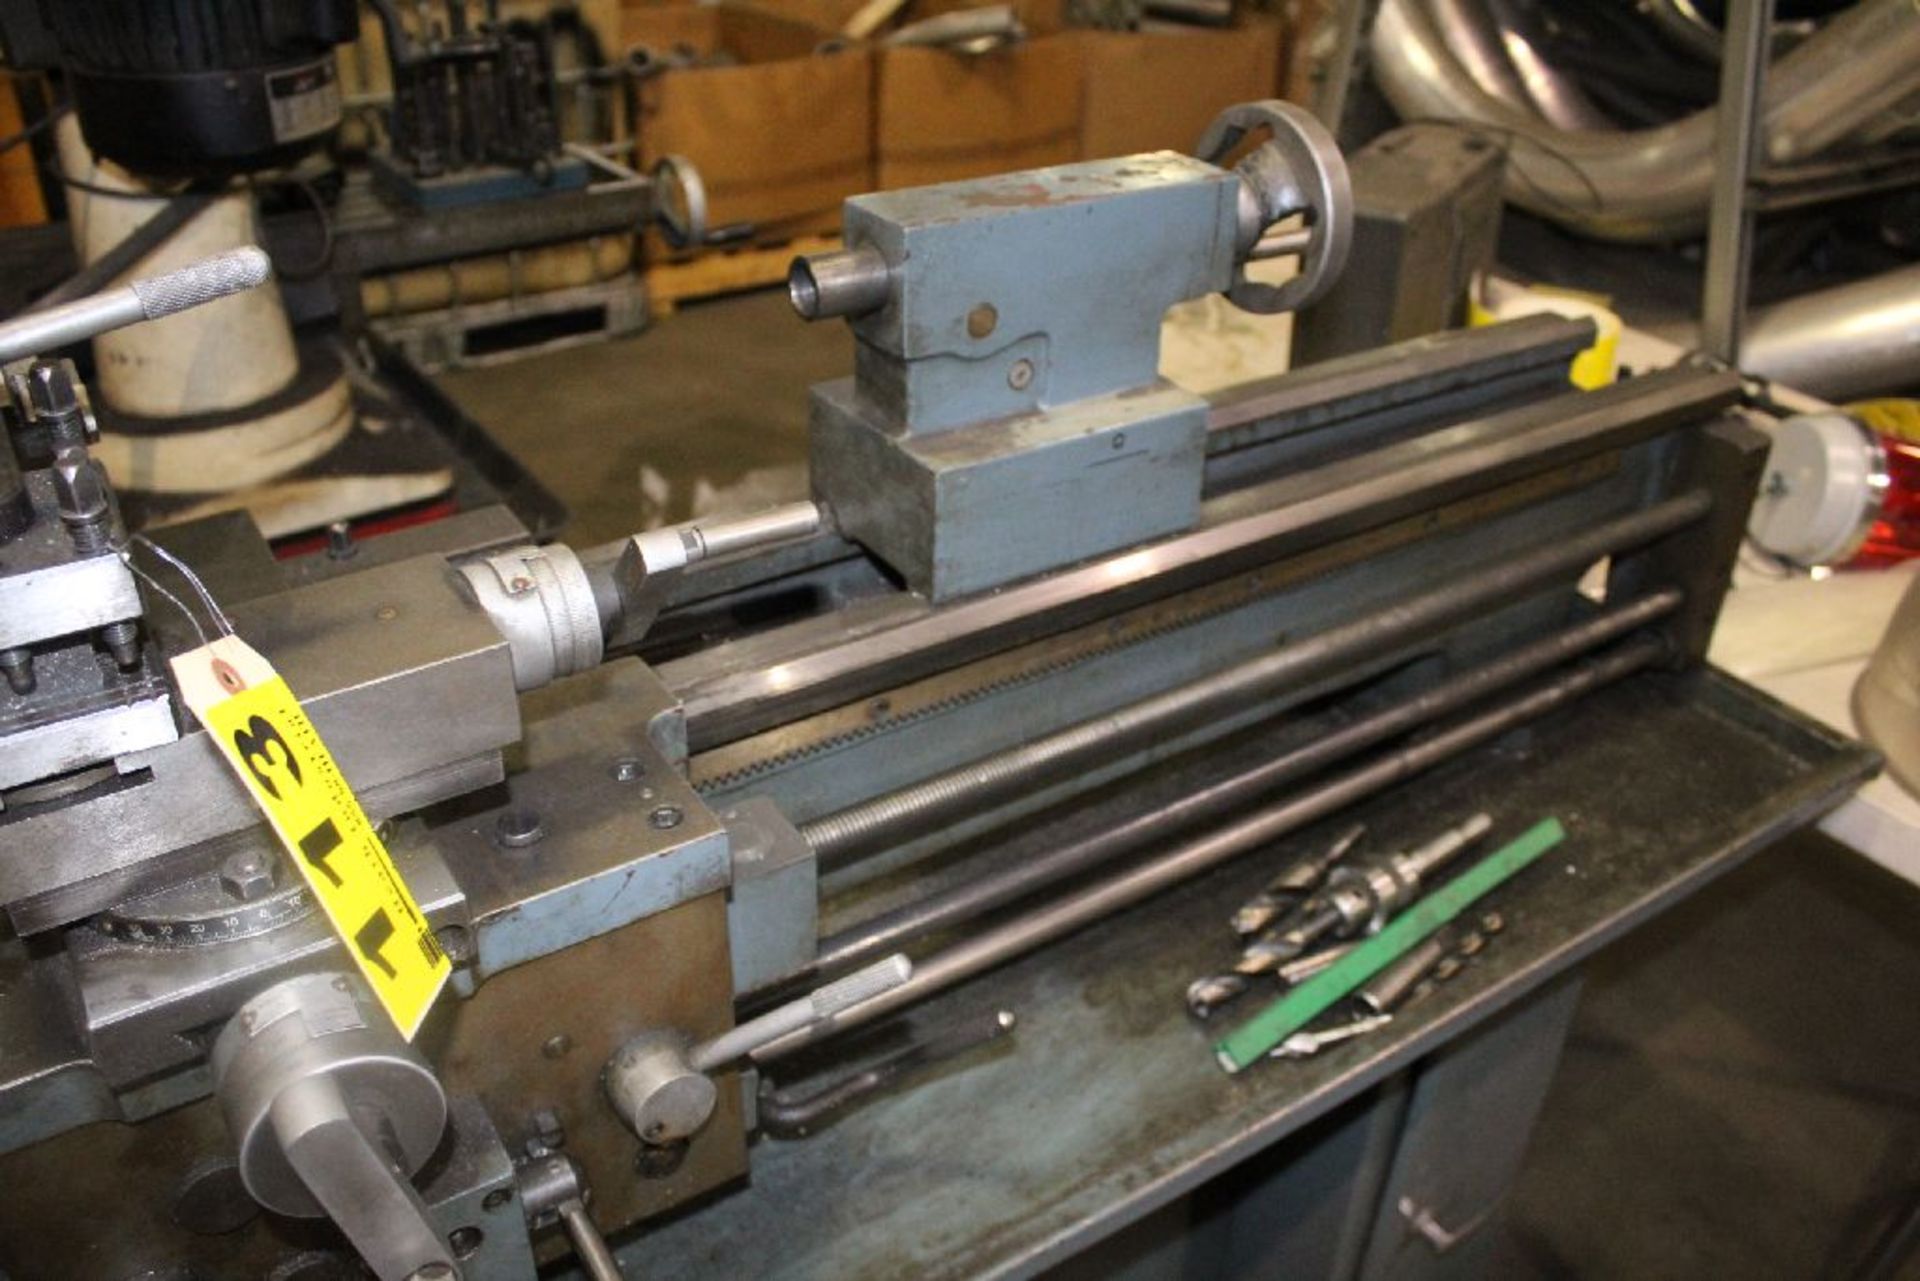 ENCO 12”X36” MODEL 110-2079 TOOLROOM LATHE, S/N 3273620048, 1550 RPM SPINDLE, INCH THREADING, 6” - Image 5 of 6